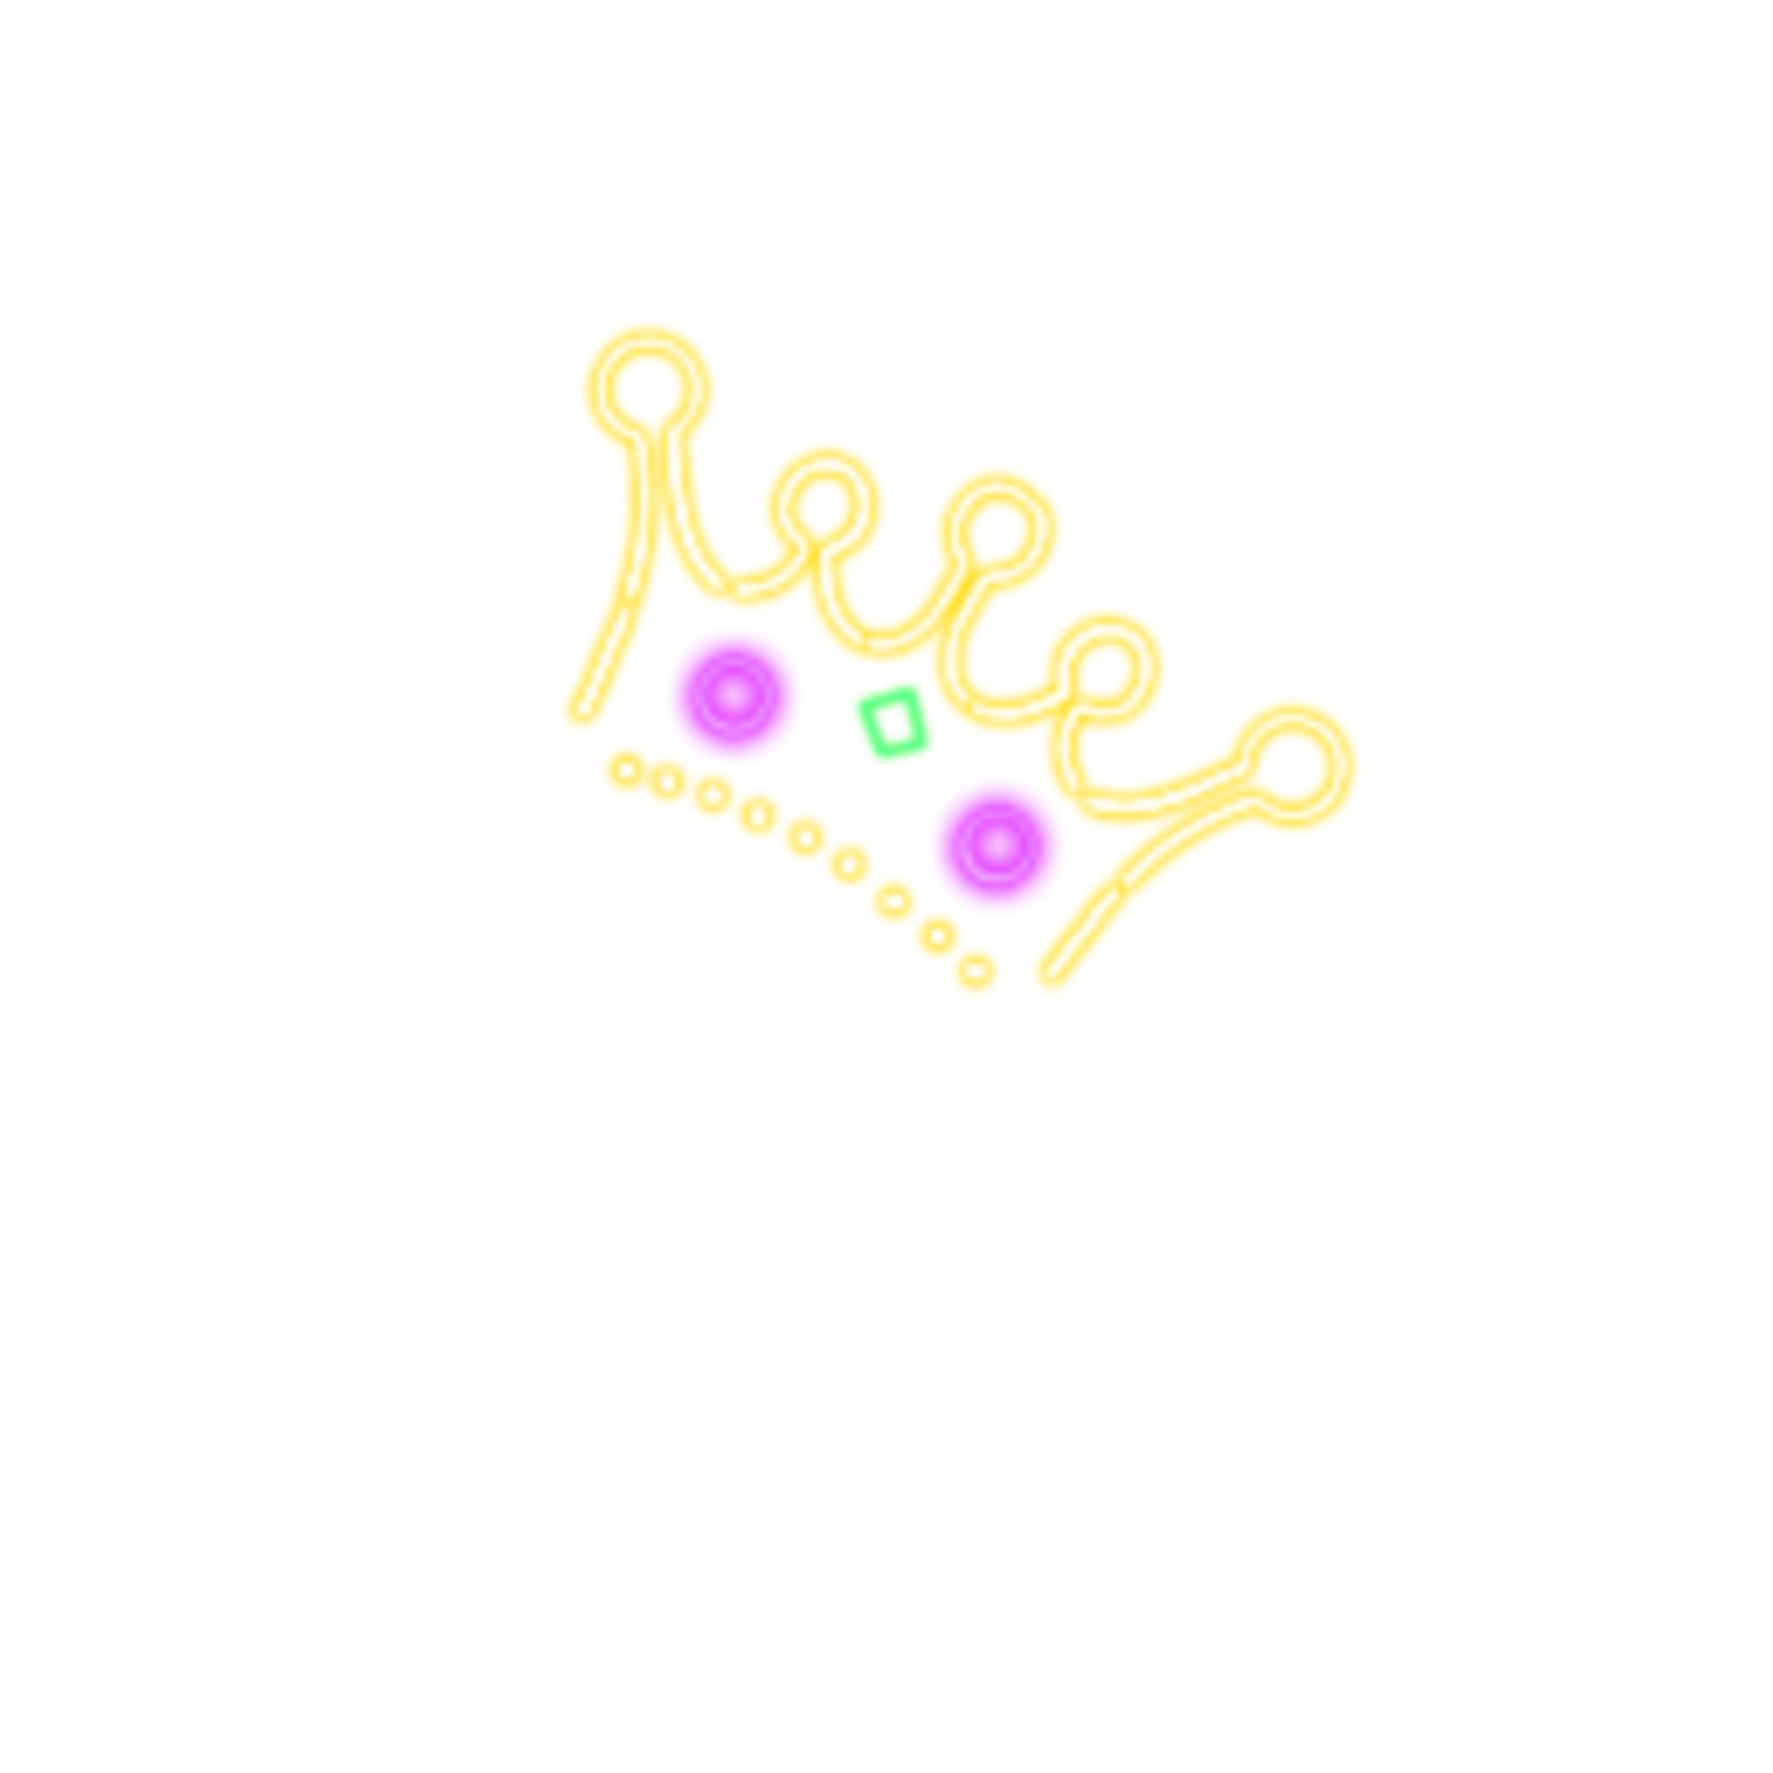 Crown Queen Princess King Royalty Sticker By Agdemoss80